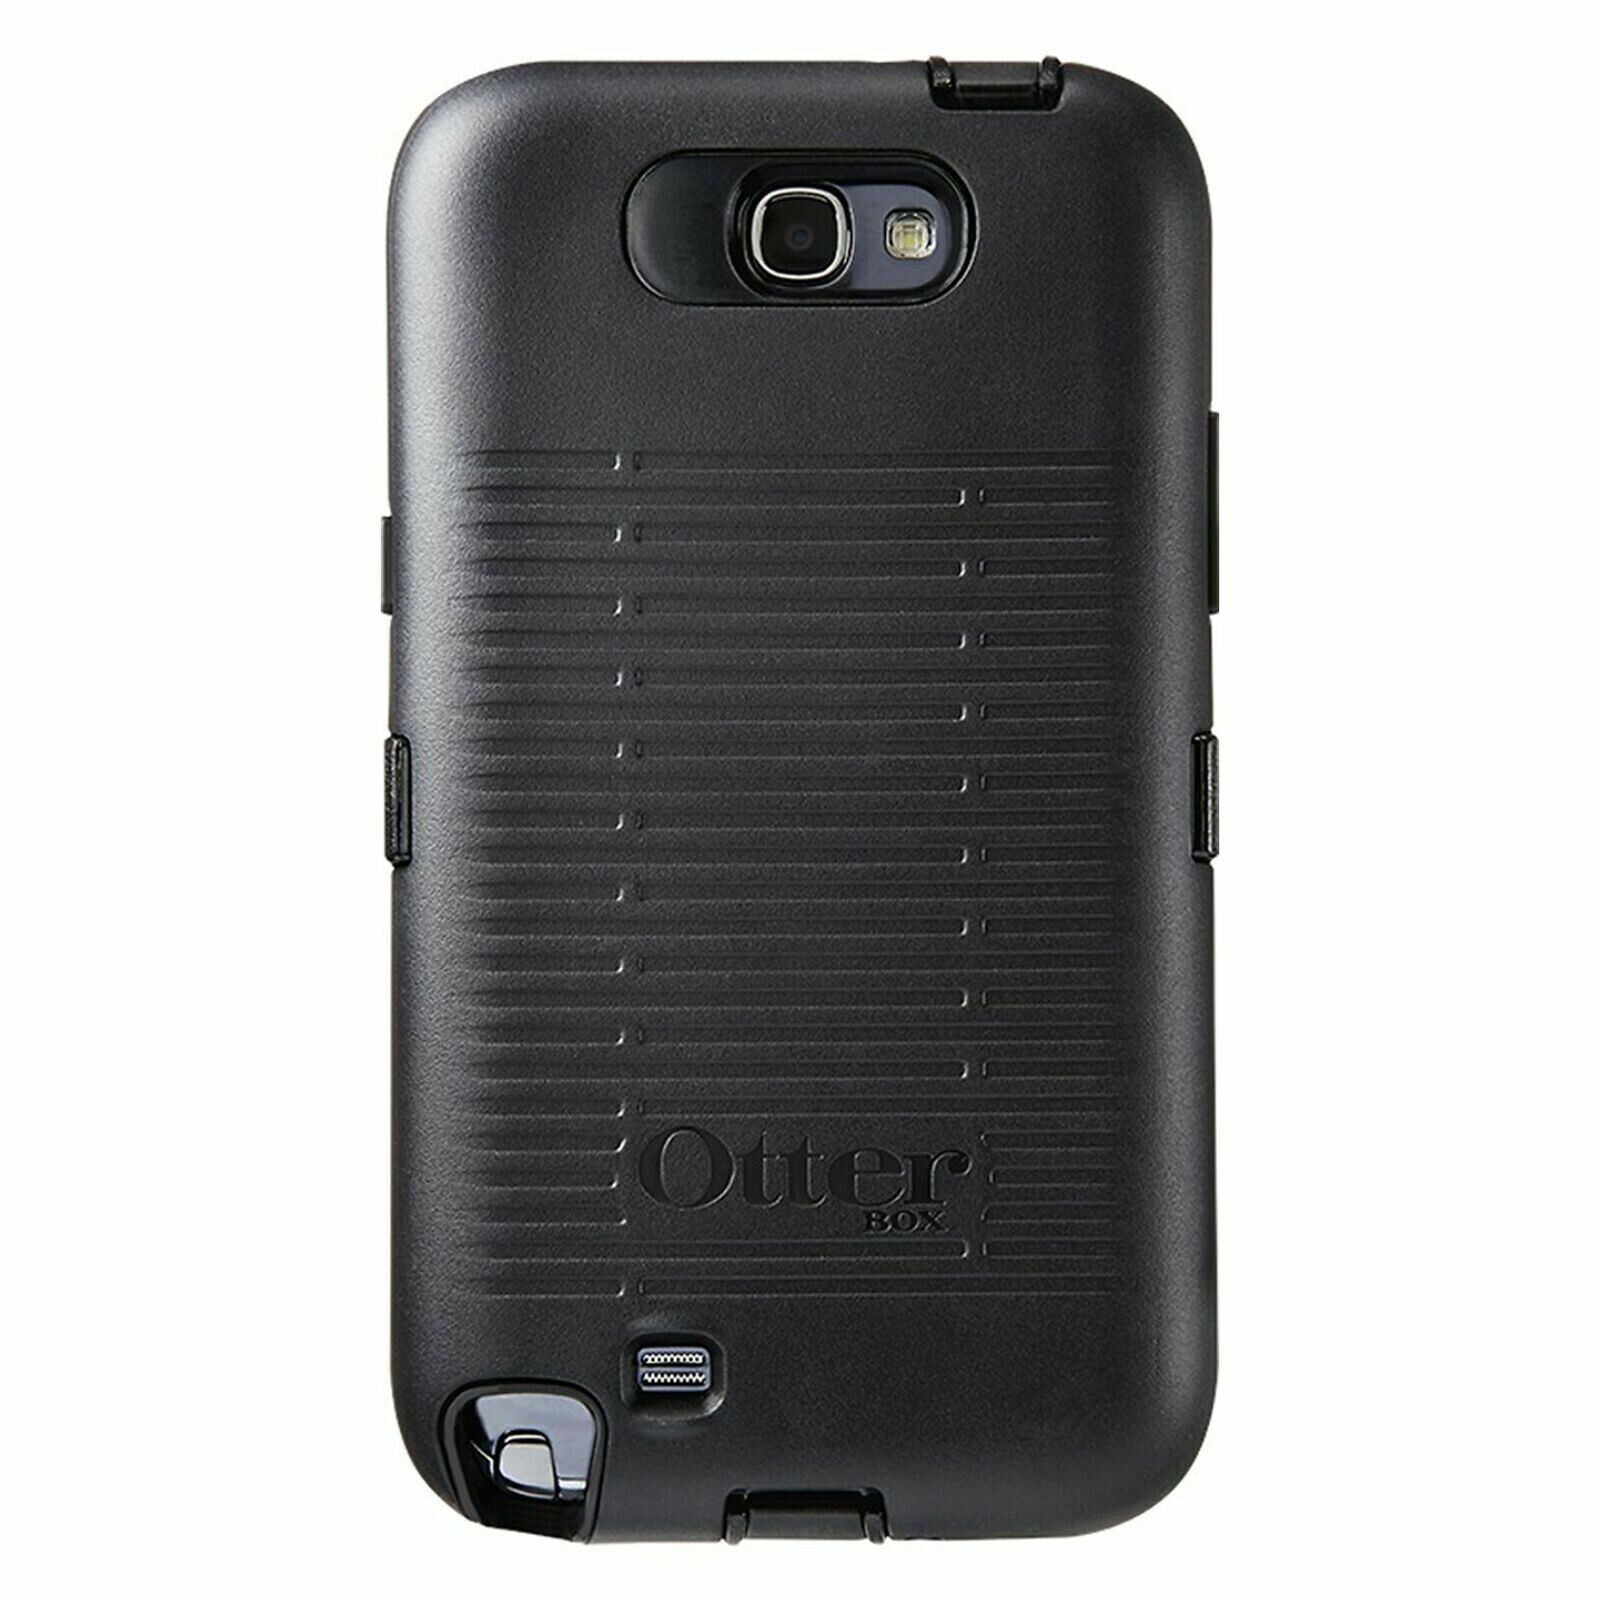 Lot of (44) Otterbox Defender Series Case for Samsung Galaxy Note 2 (II)